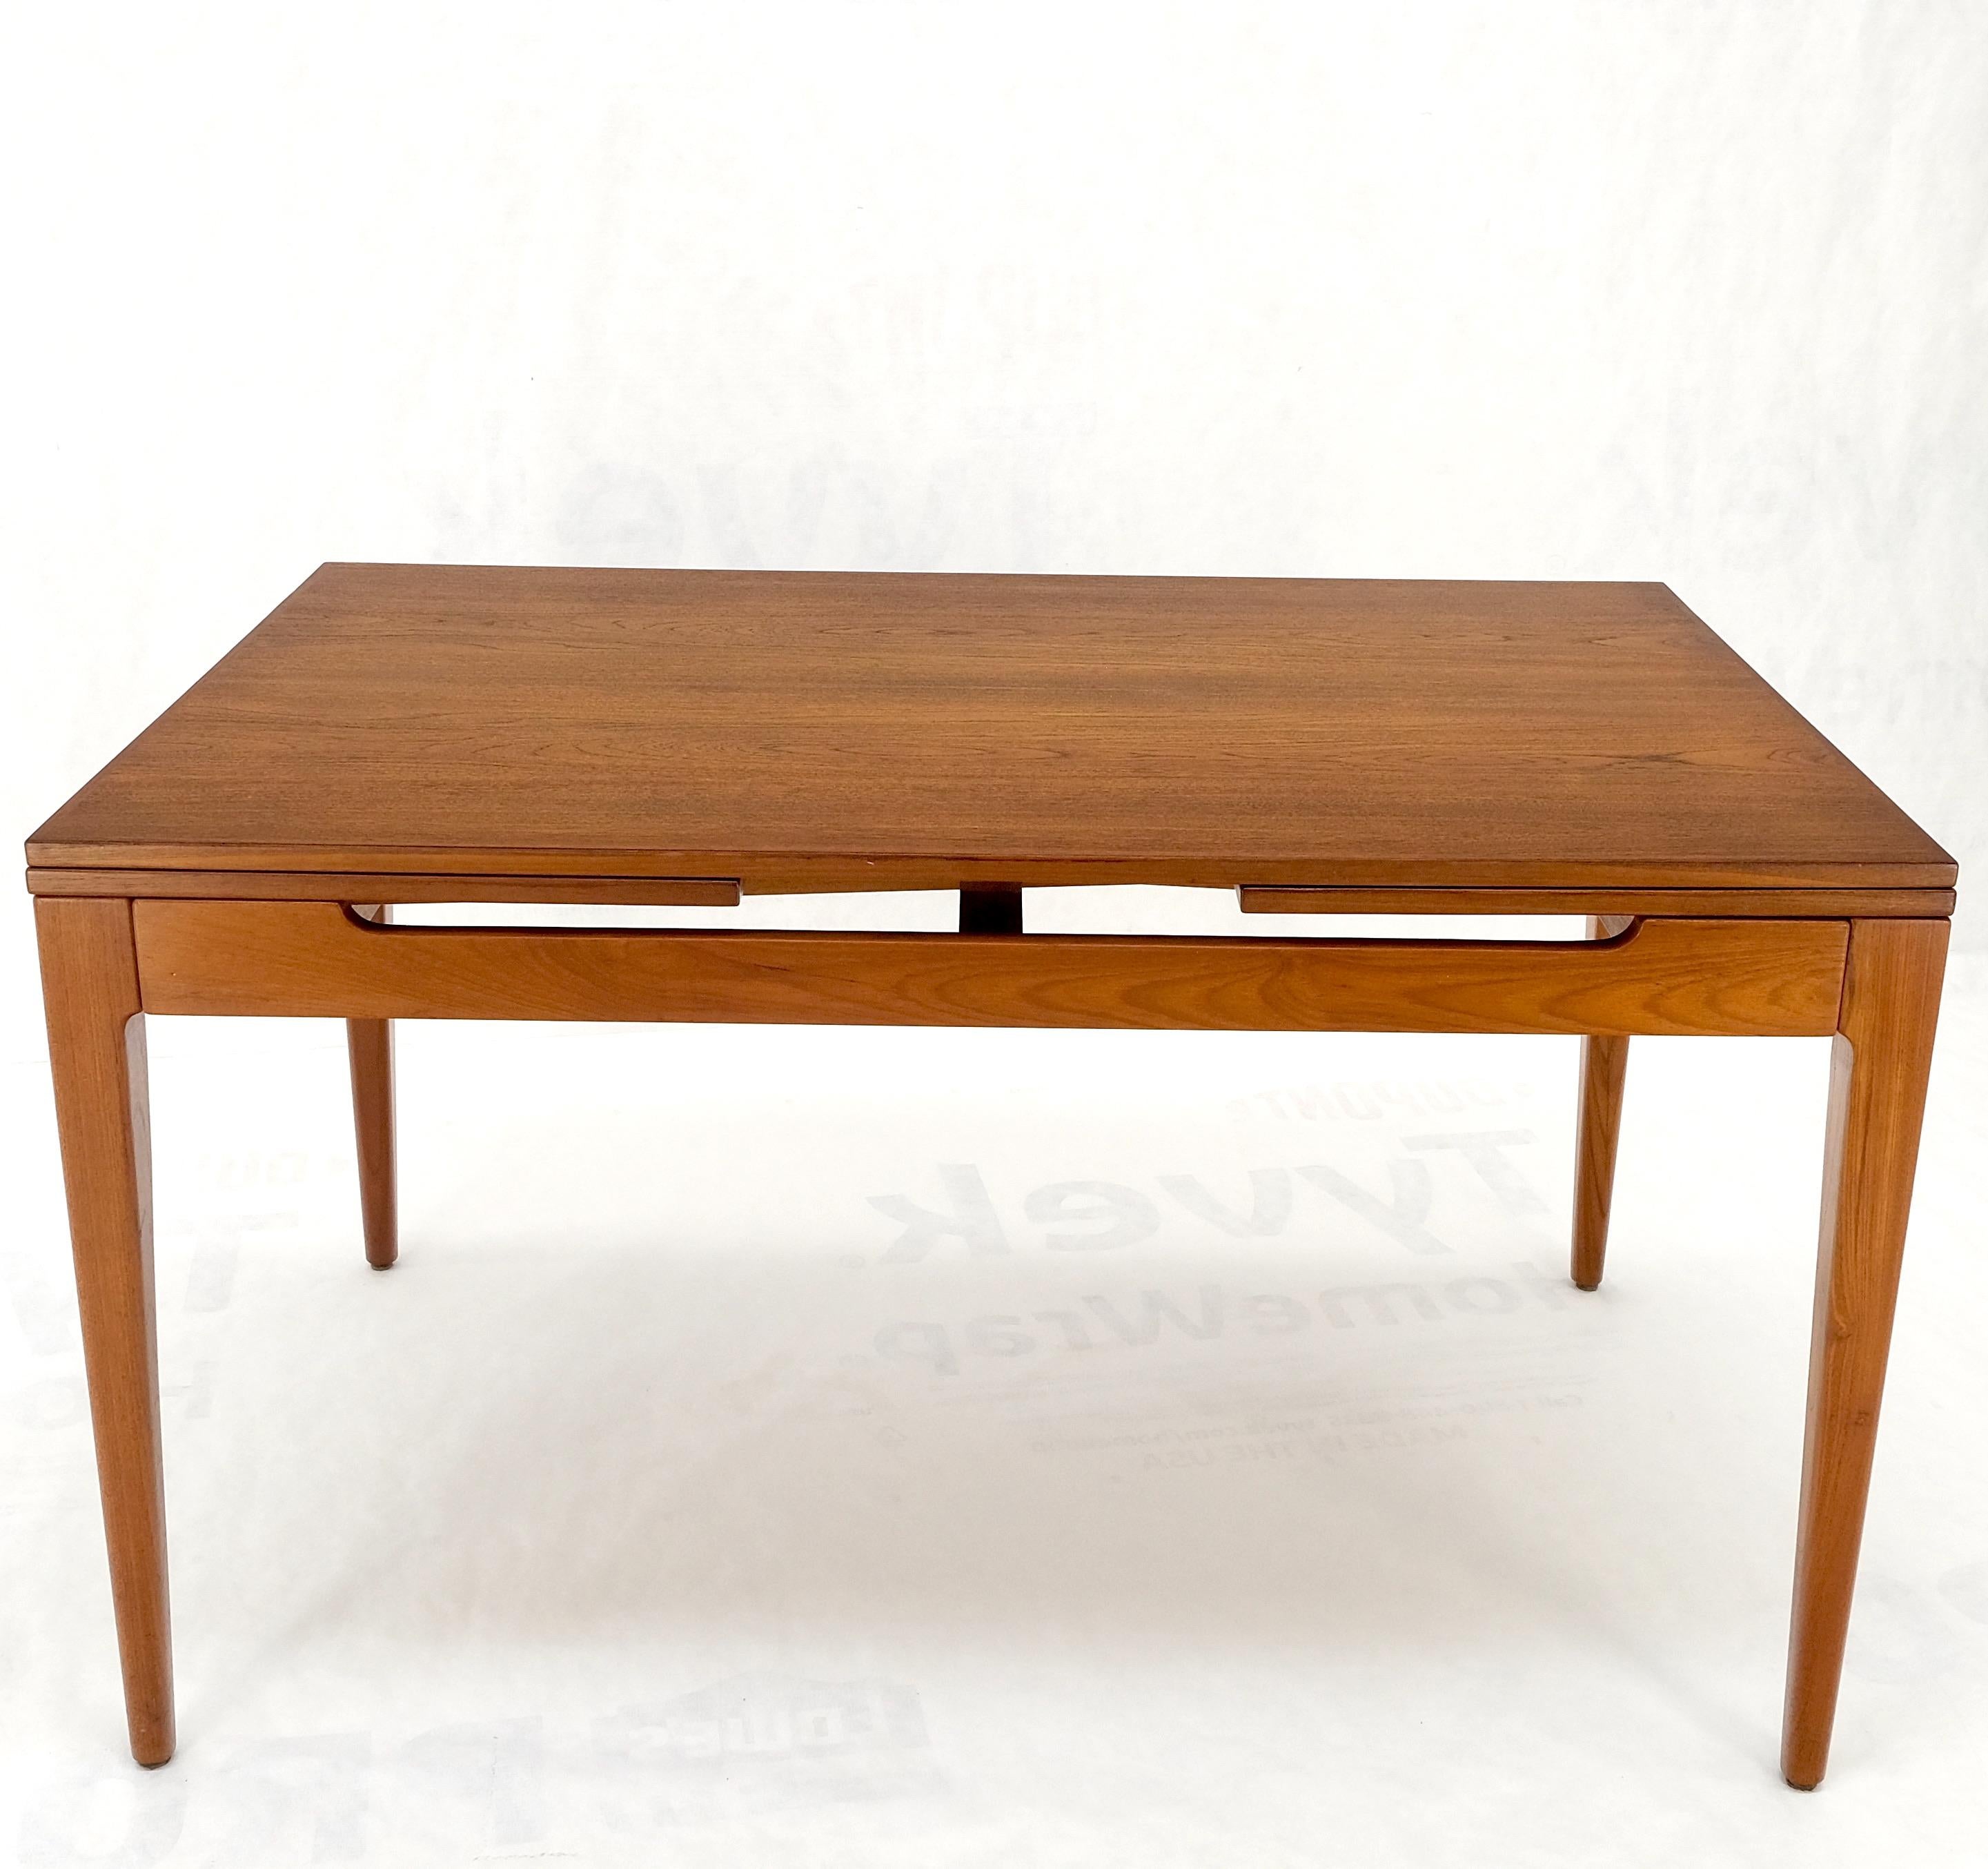 Danish Mid-Century Modern Teak Refectory Dining Table Two Leafs Mint! For Sale 7